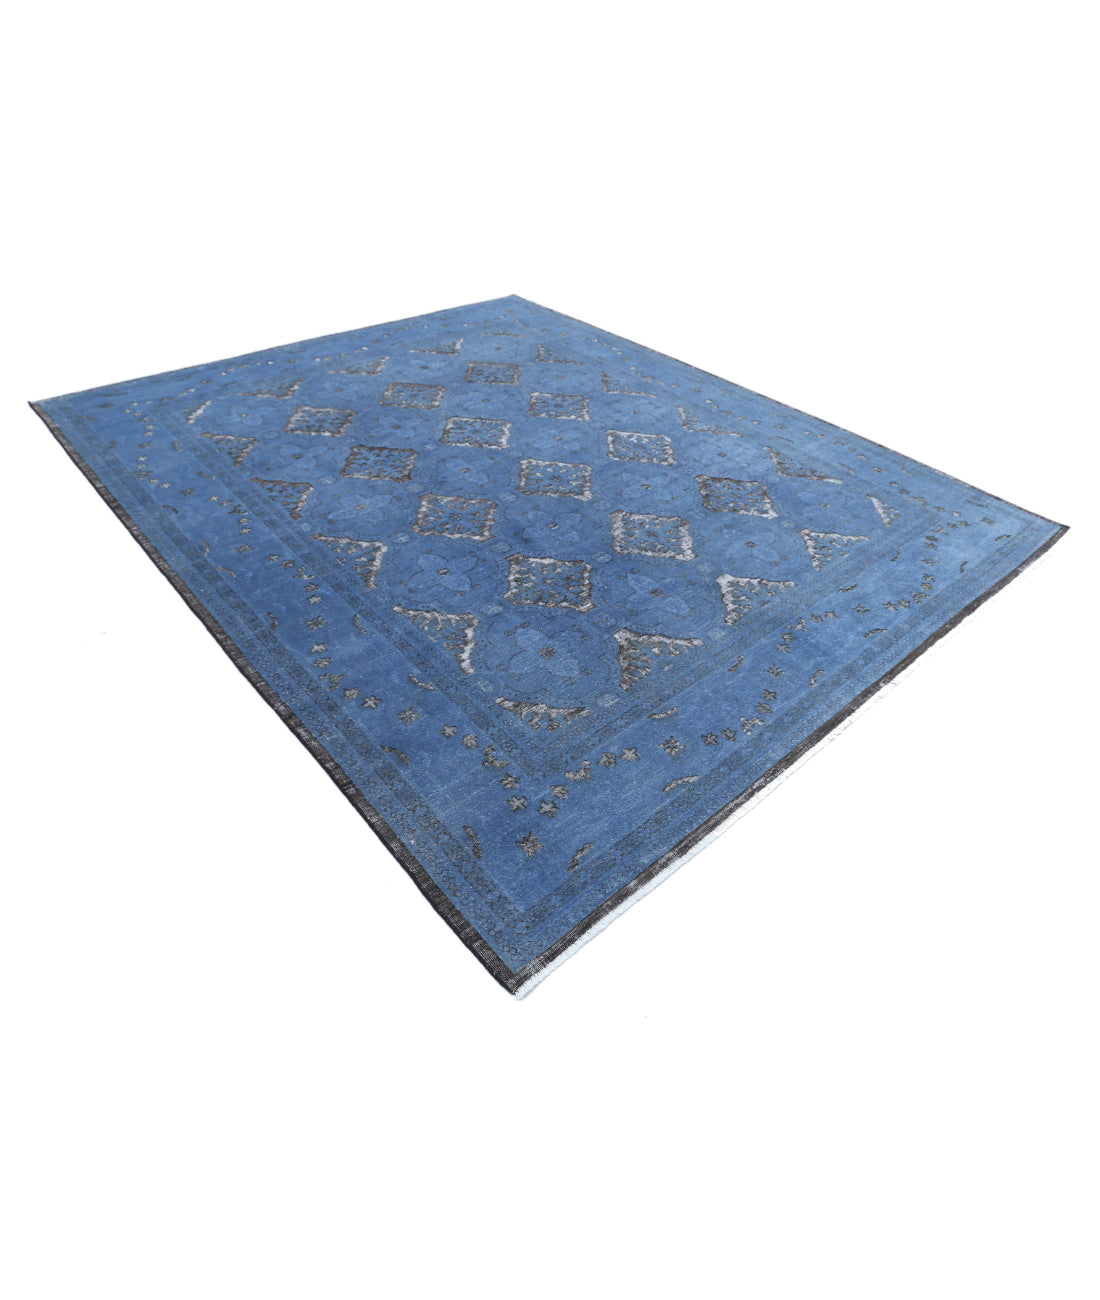 Hand Knotted Onyx Wool Rug - 8'1'' x 9'9'' 8'1'' x 9'9'' (243 X 293) / Blue / Blue